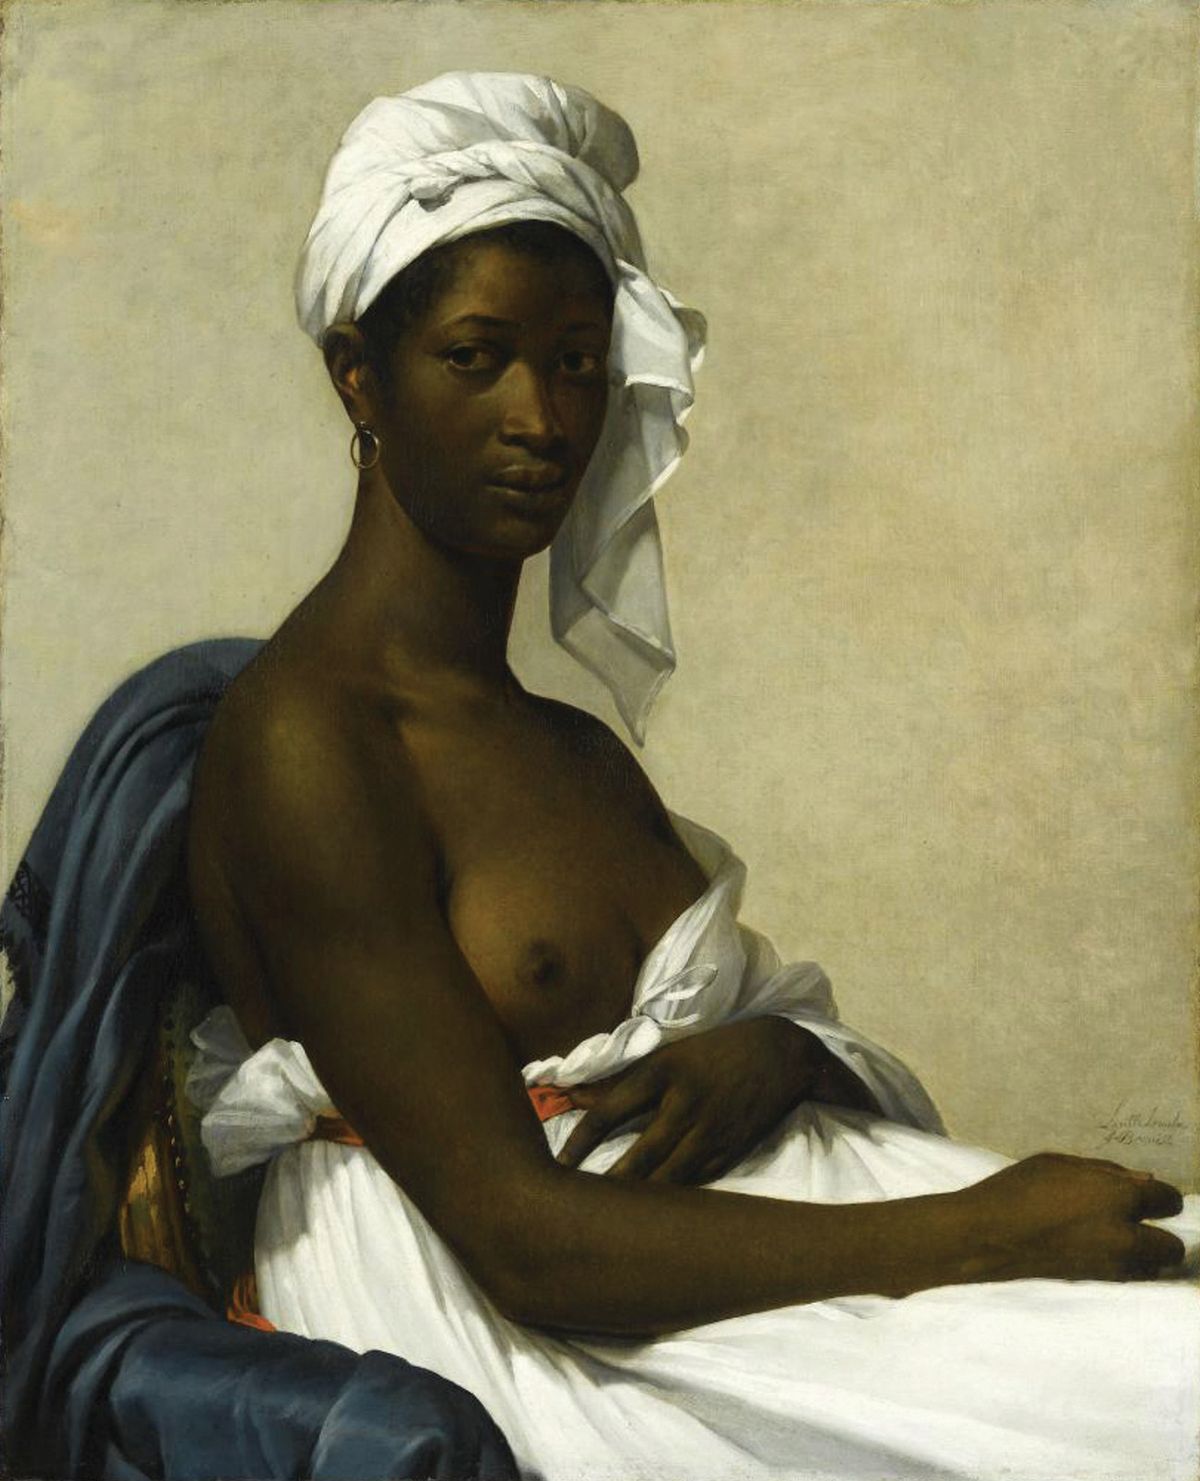 Marie-Guillemine Benoist’s Portrait of a Negress (1800) was renamed Portrait of Madeleine in a recent exhibition. “In reclaiming her name [...] the subject was to regain some measure of her humanity,” writes Edugyan Image courtesy of Musée du Louvre